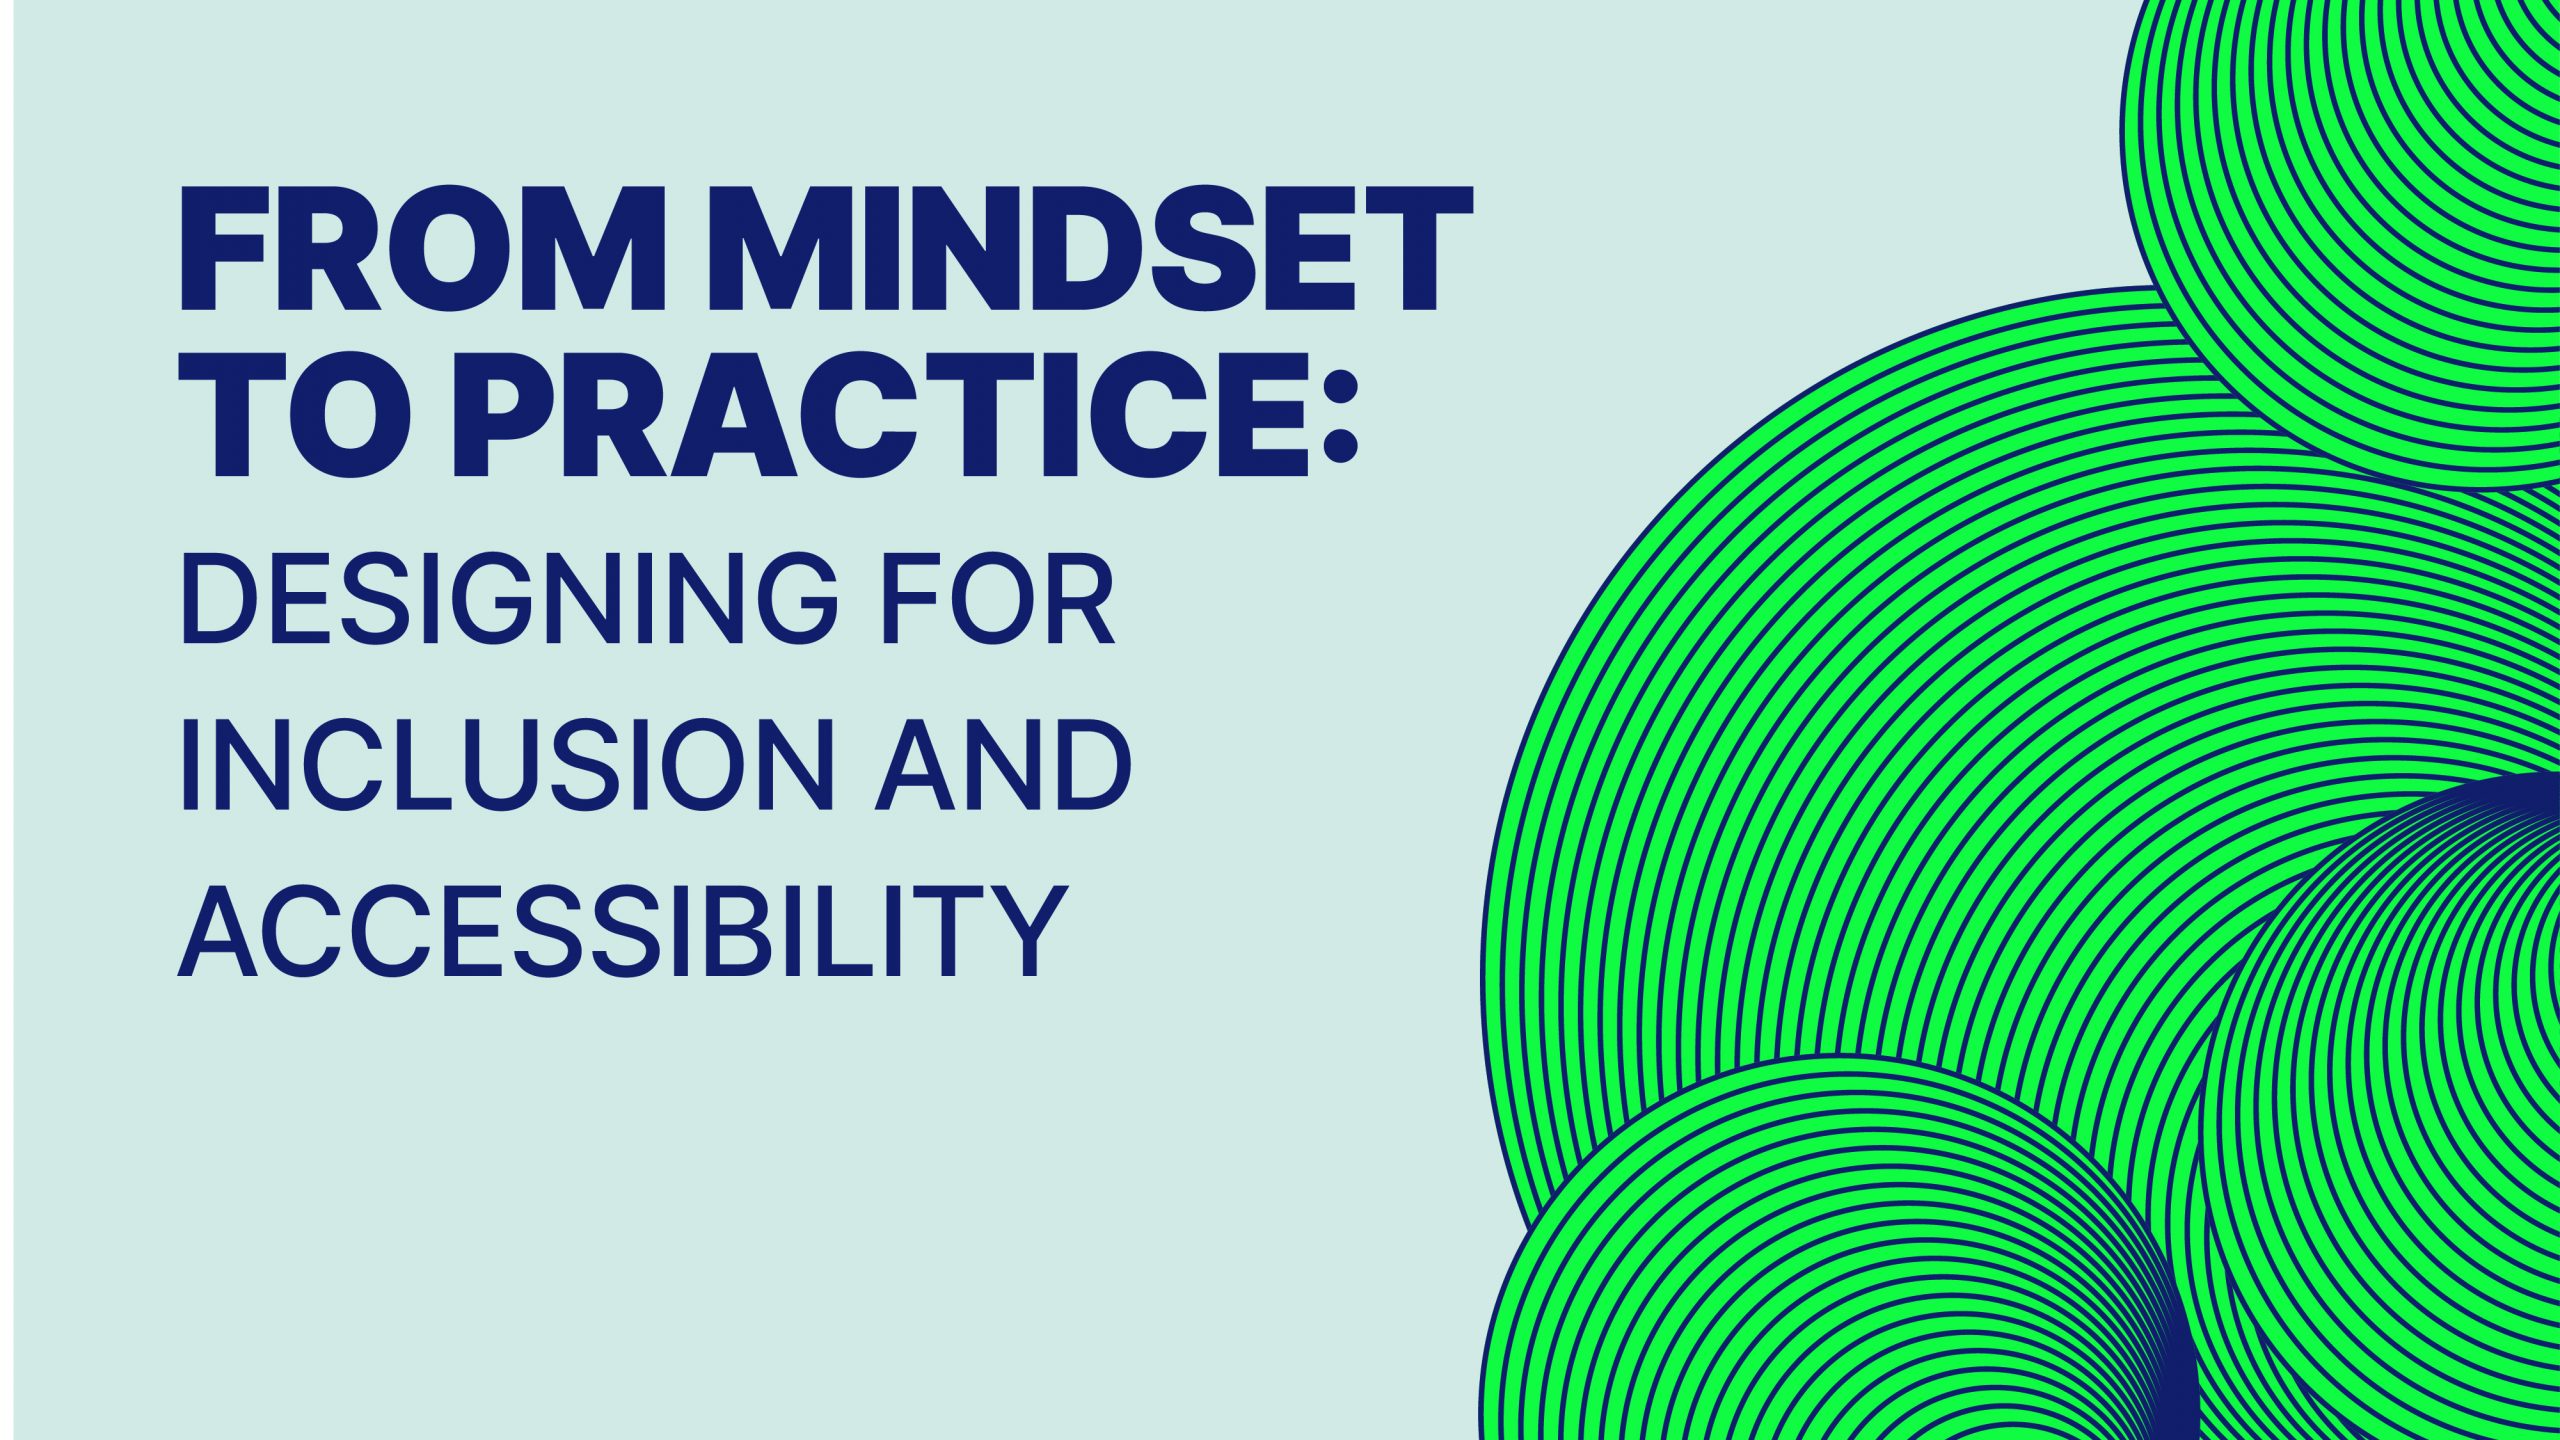 From mindset to practice: Designing for inclusion and accessibility